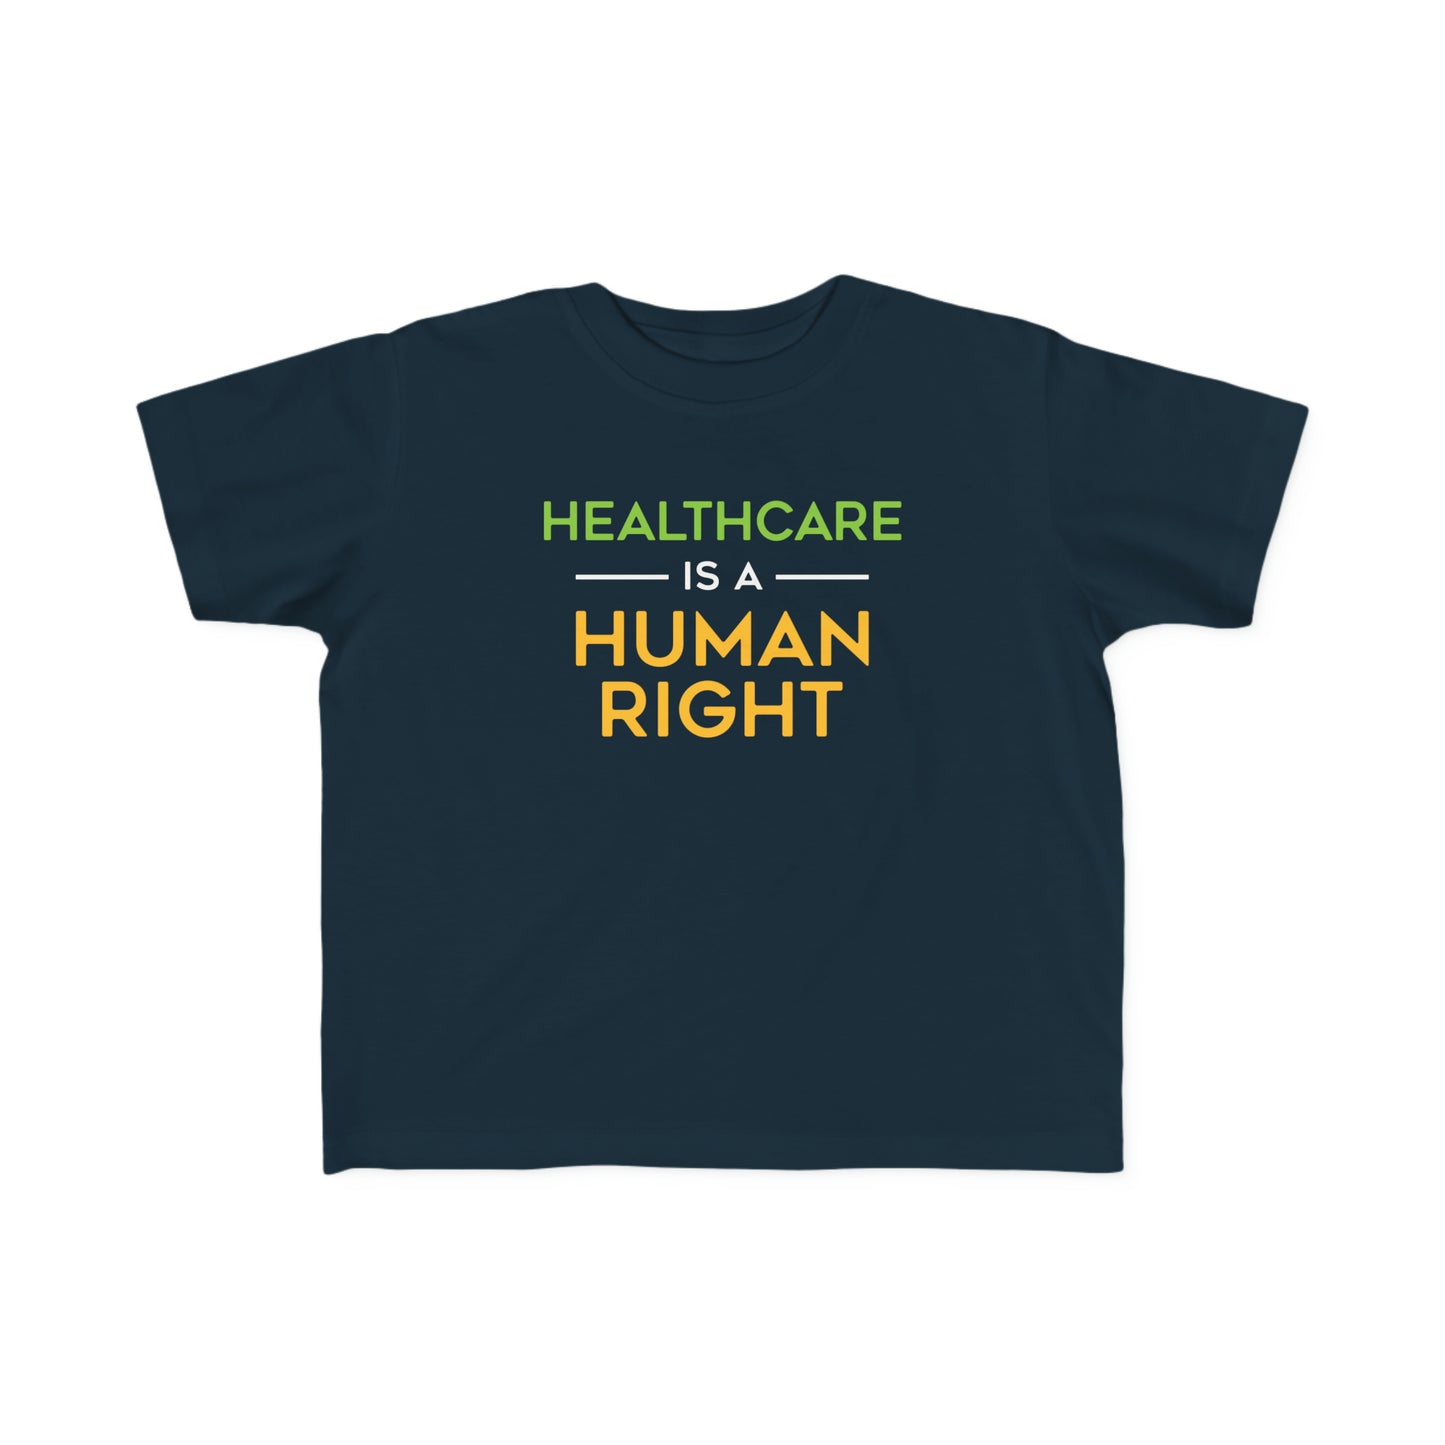 “Healthcare Is A Human Right” Toddler's Tee